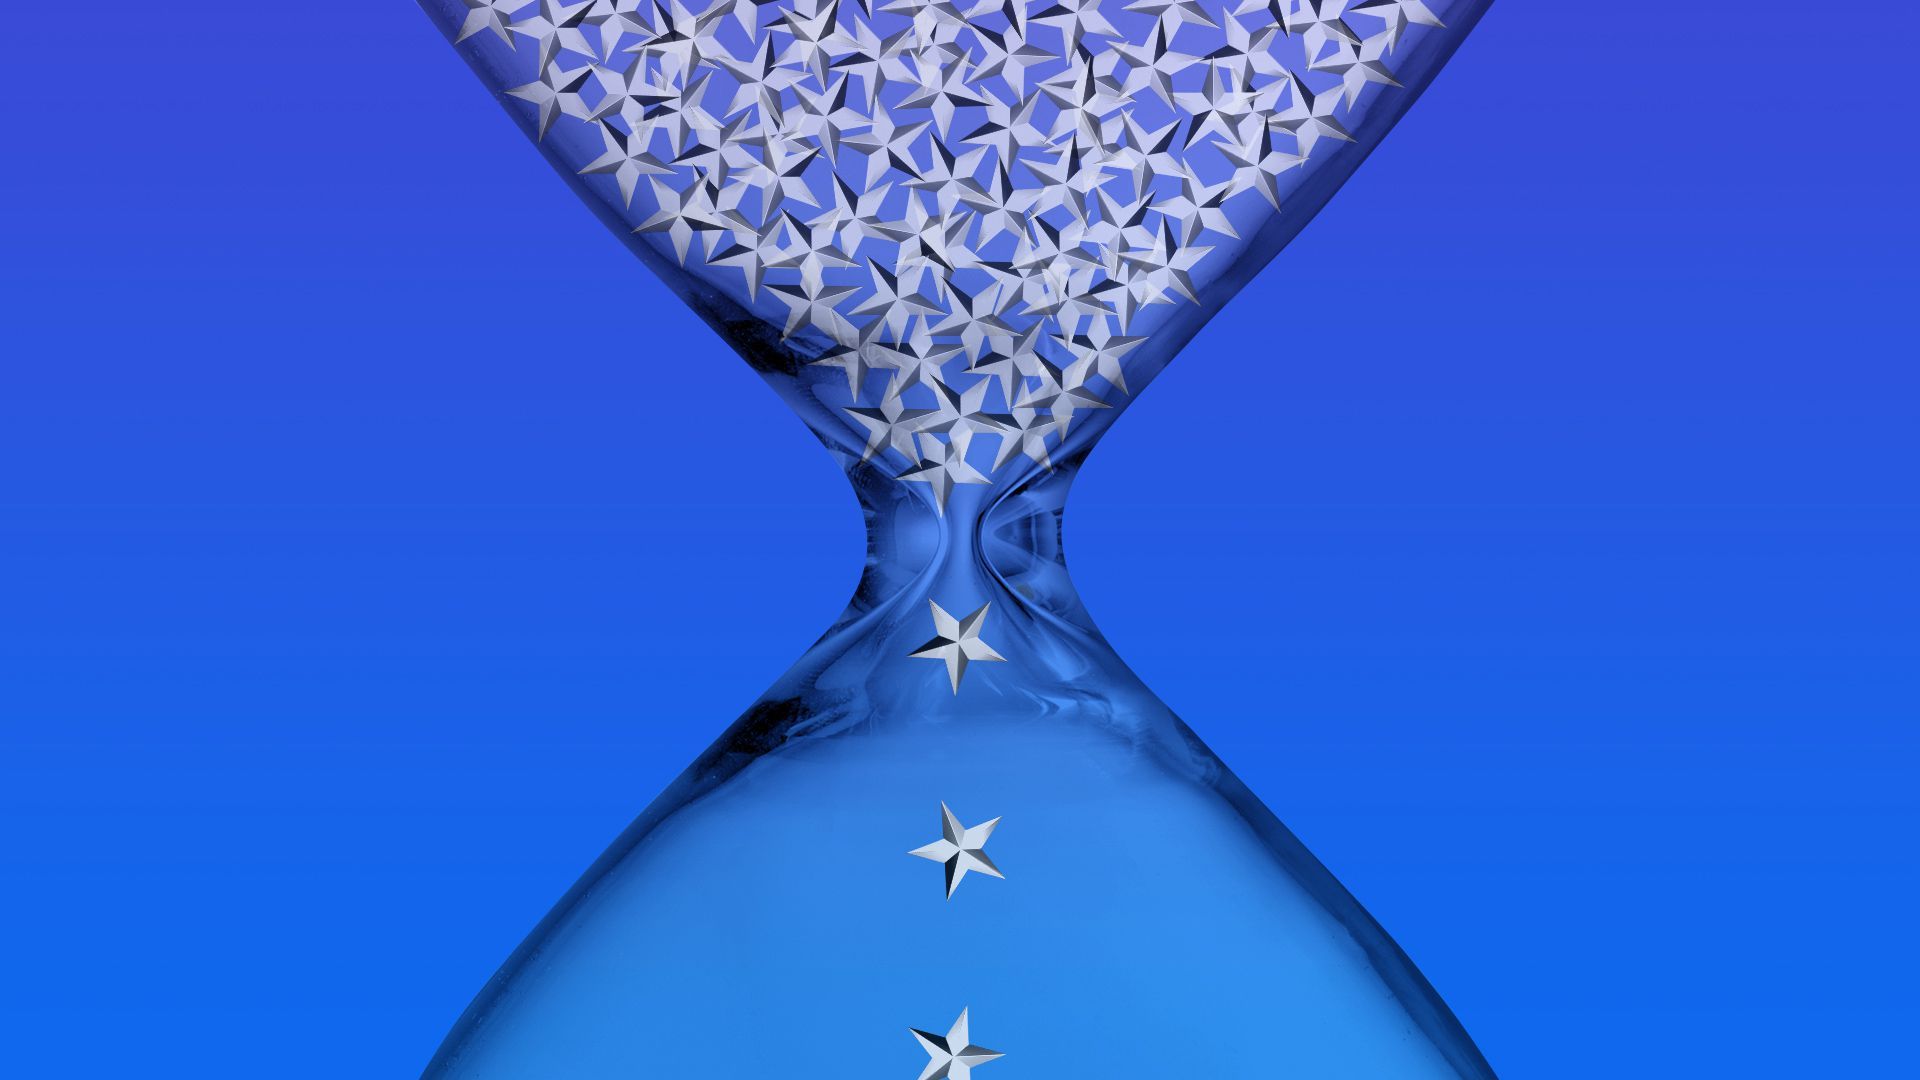 Illustration of a close up an hourglass with stars falling through.